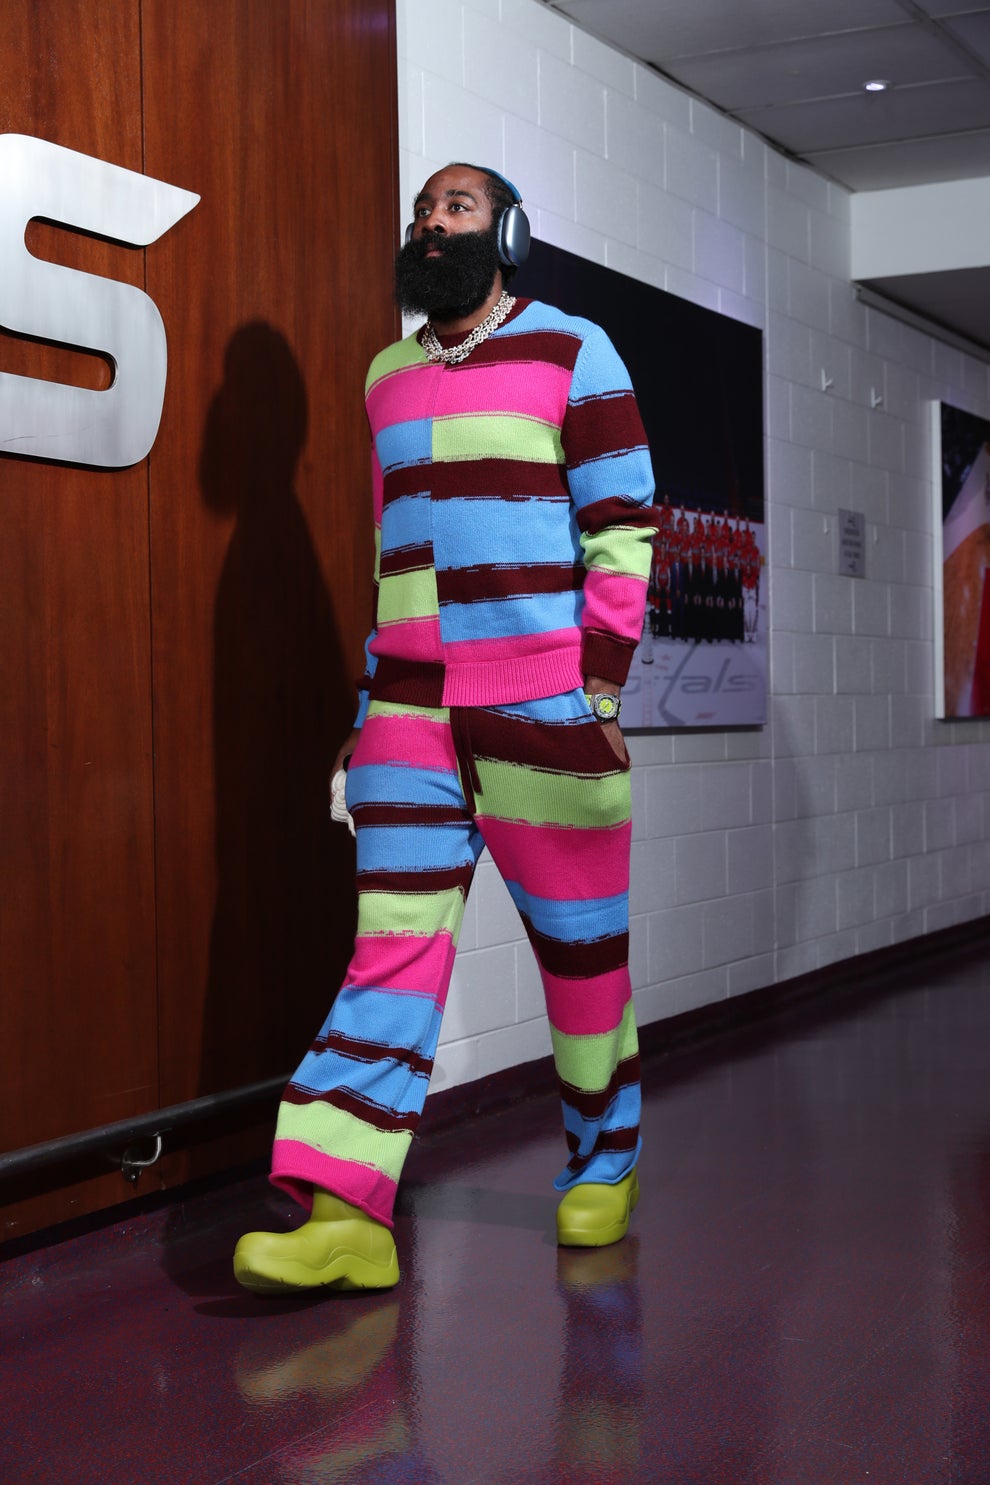 James Harden's snake skin outfit was total fire